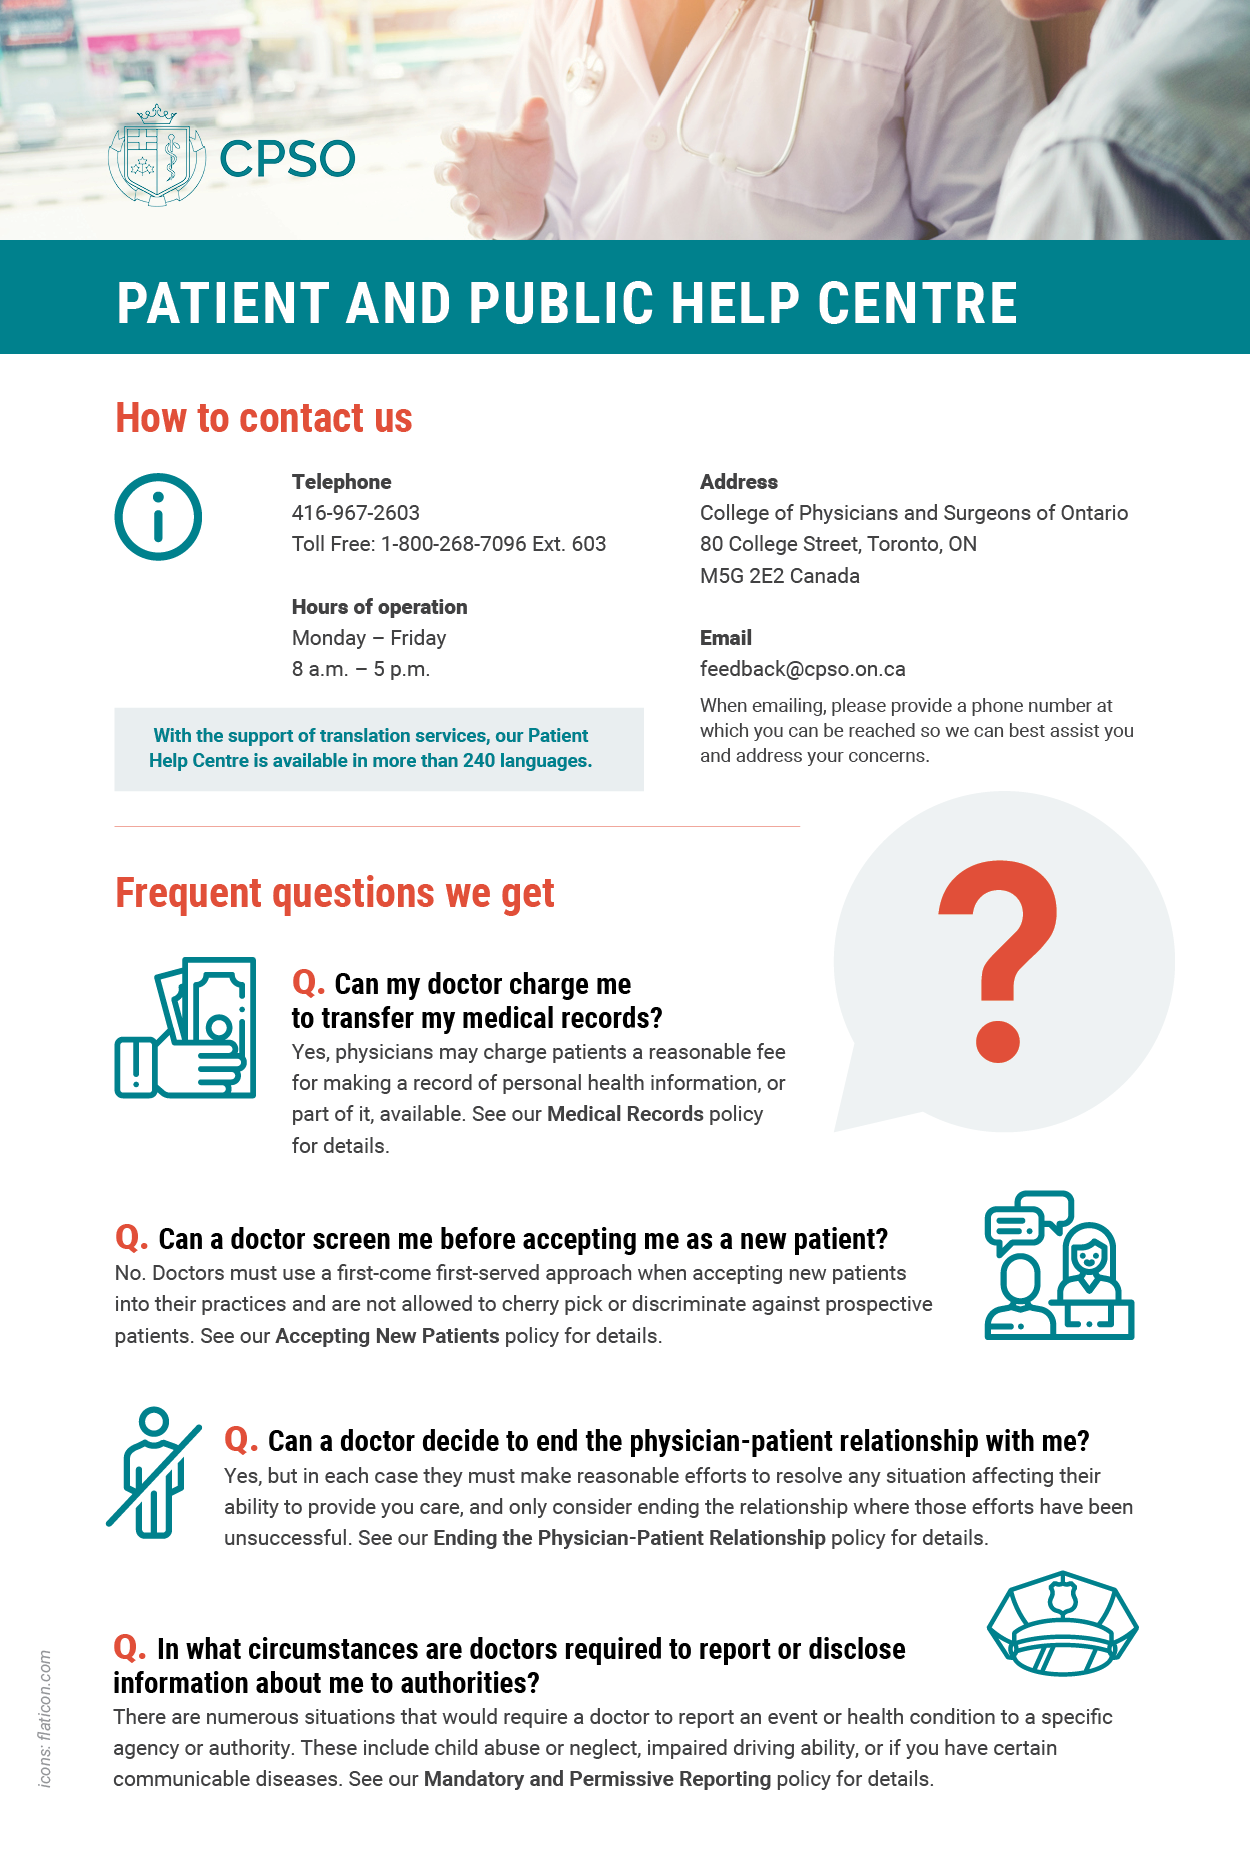 Infographic describing the Patient Help Centre and the questions they can and cannot answer